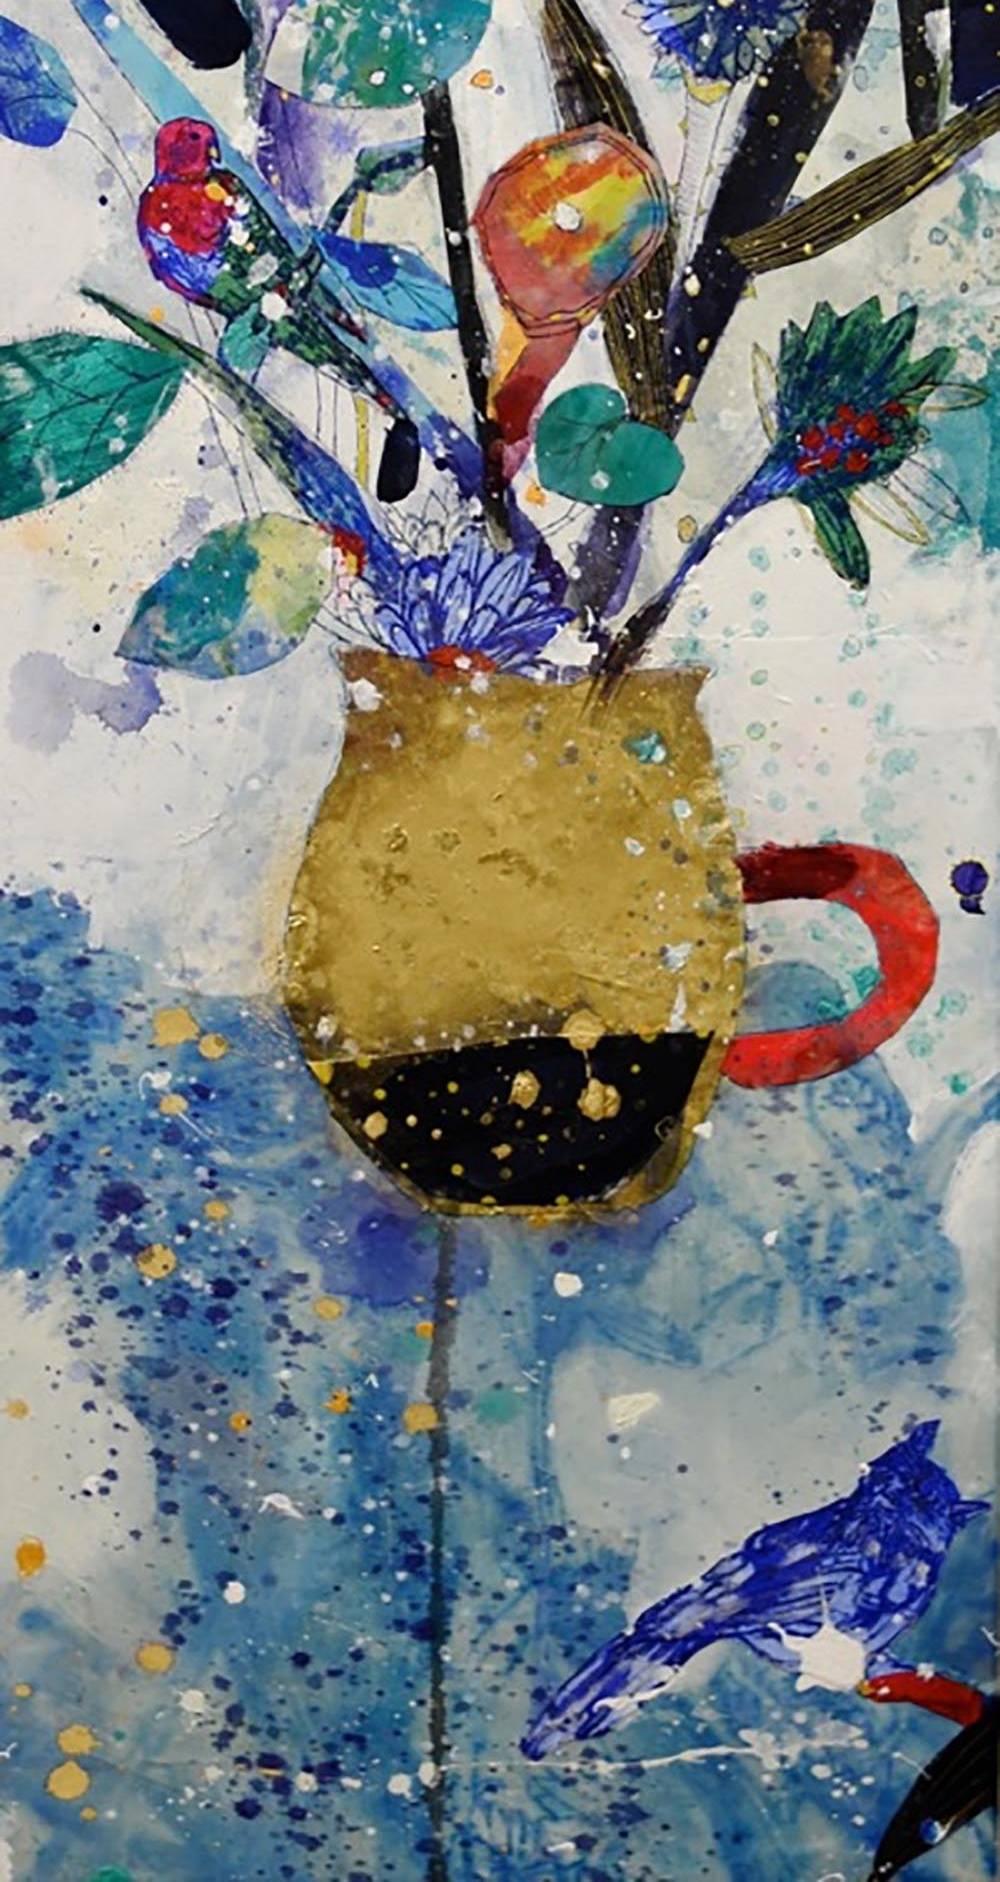 Flowers in a Vase (moon) - Painting by Fumiko Toda